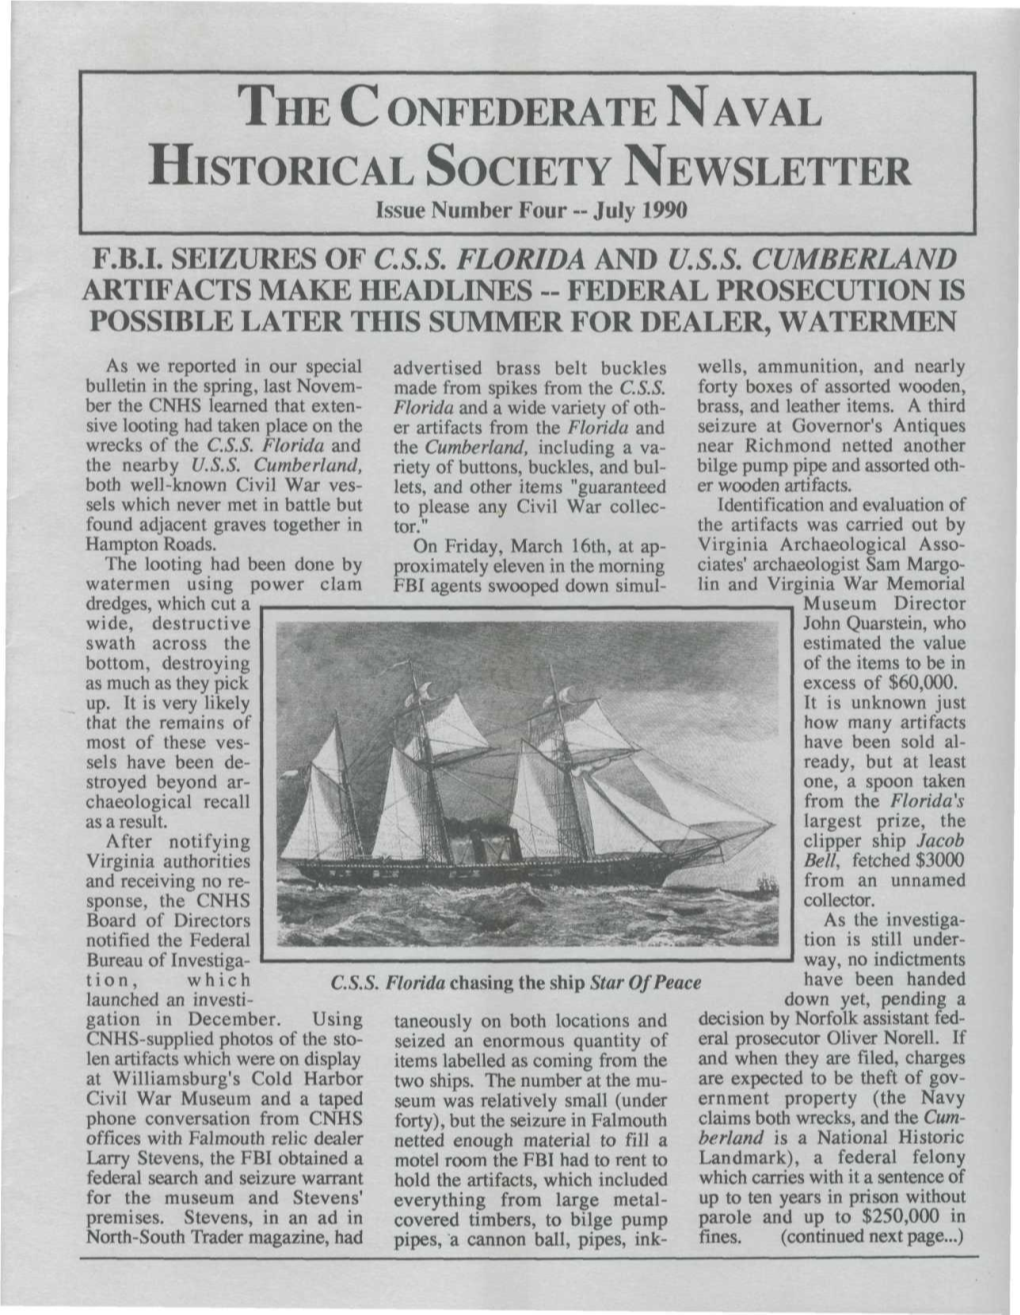 THE C ONFEDERATE NAVAL HISTORICAL SOCIETY NEWSLETTER Issue Number Four -- July 1990 F.B.I